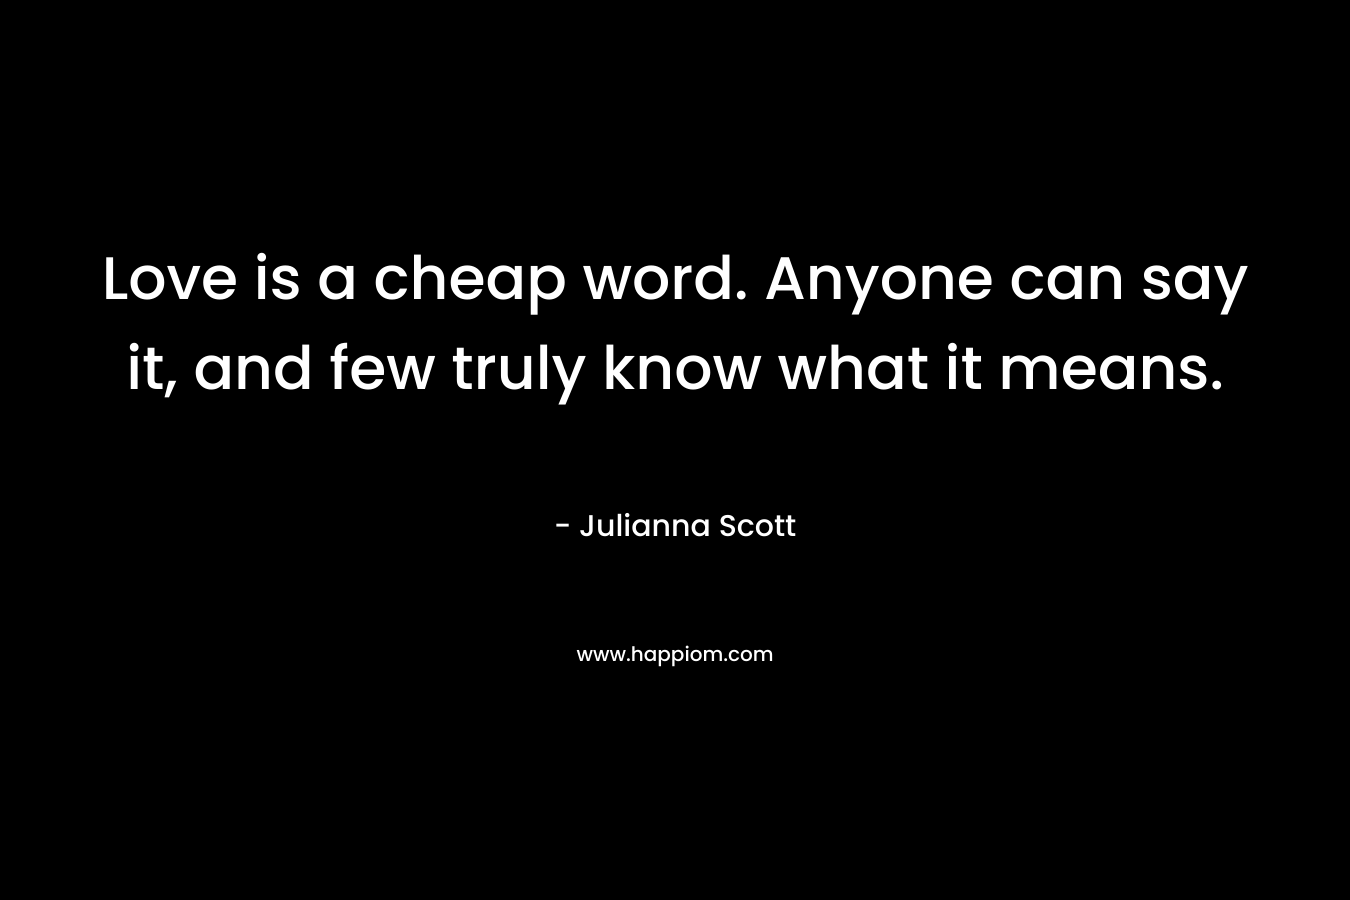 Love is a cheap word. Anyone can say it, and few truly know what it means. – Julianna Scott